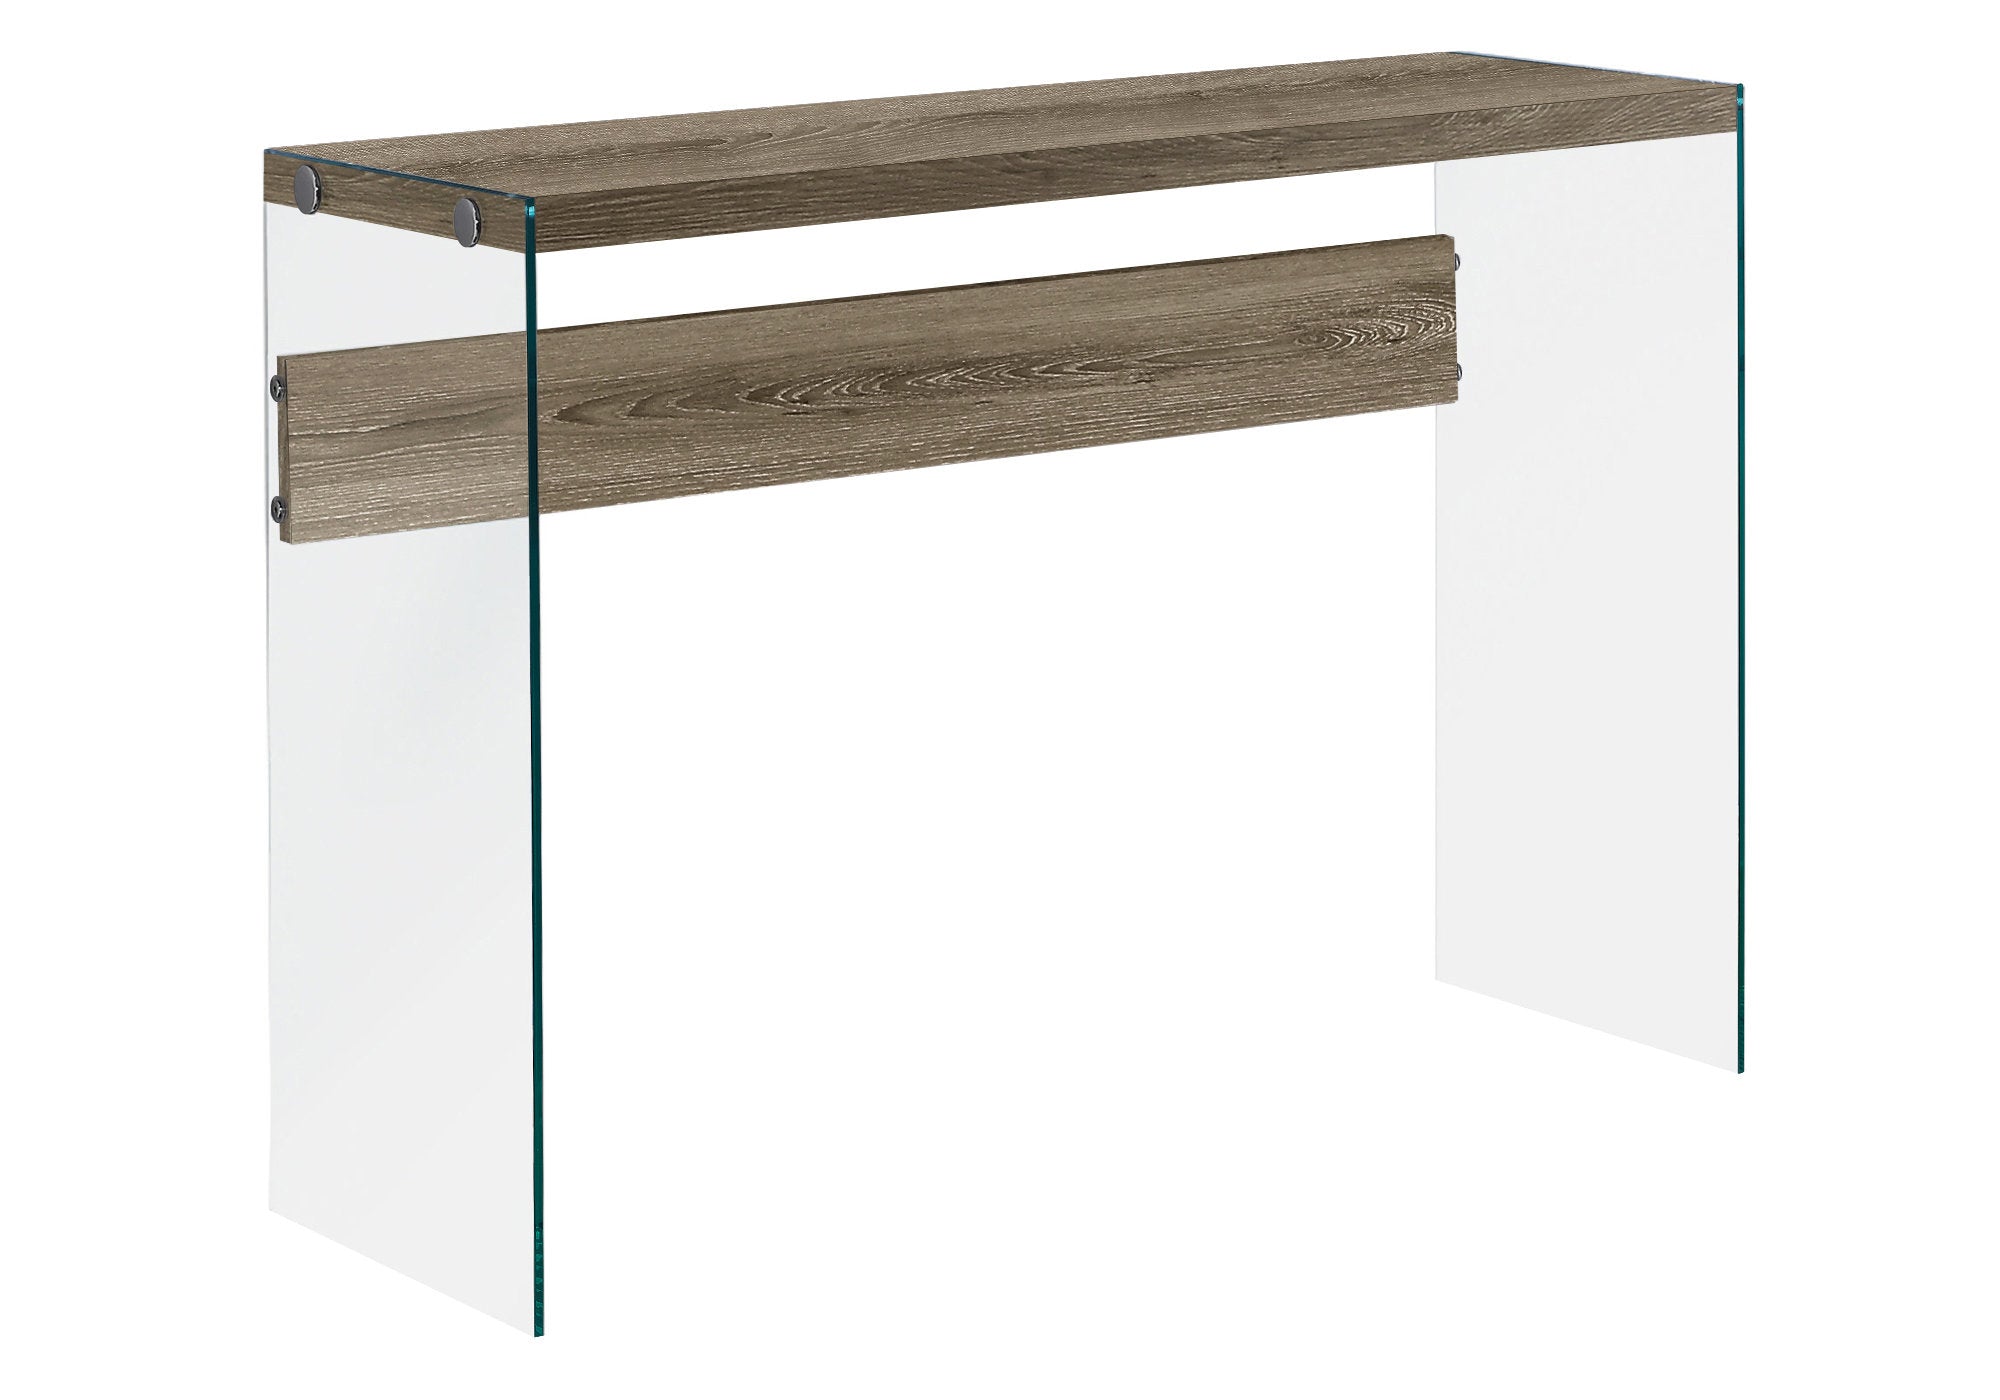 MN-953055    Accent Table, Console, Entryway, Narrow, Sofa, Living Room, Bedroom, Tempered Glass, Laminate, Dark Taupe, Clear, Contemporary, Modern